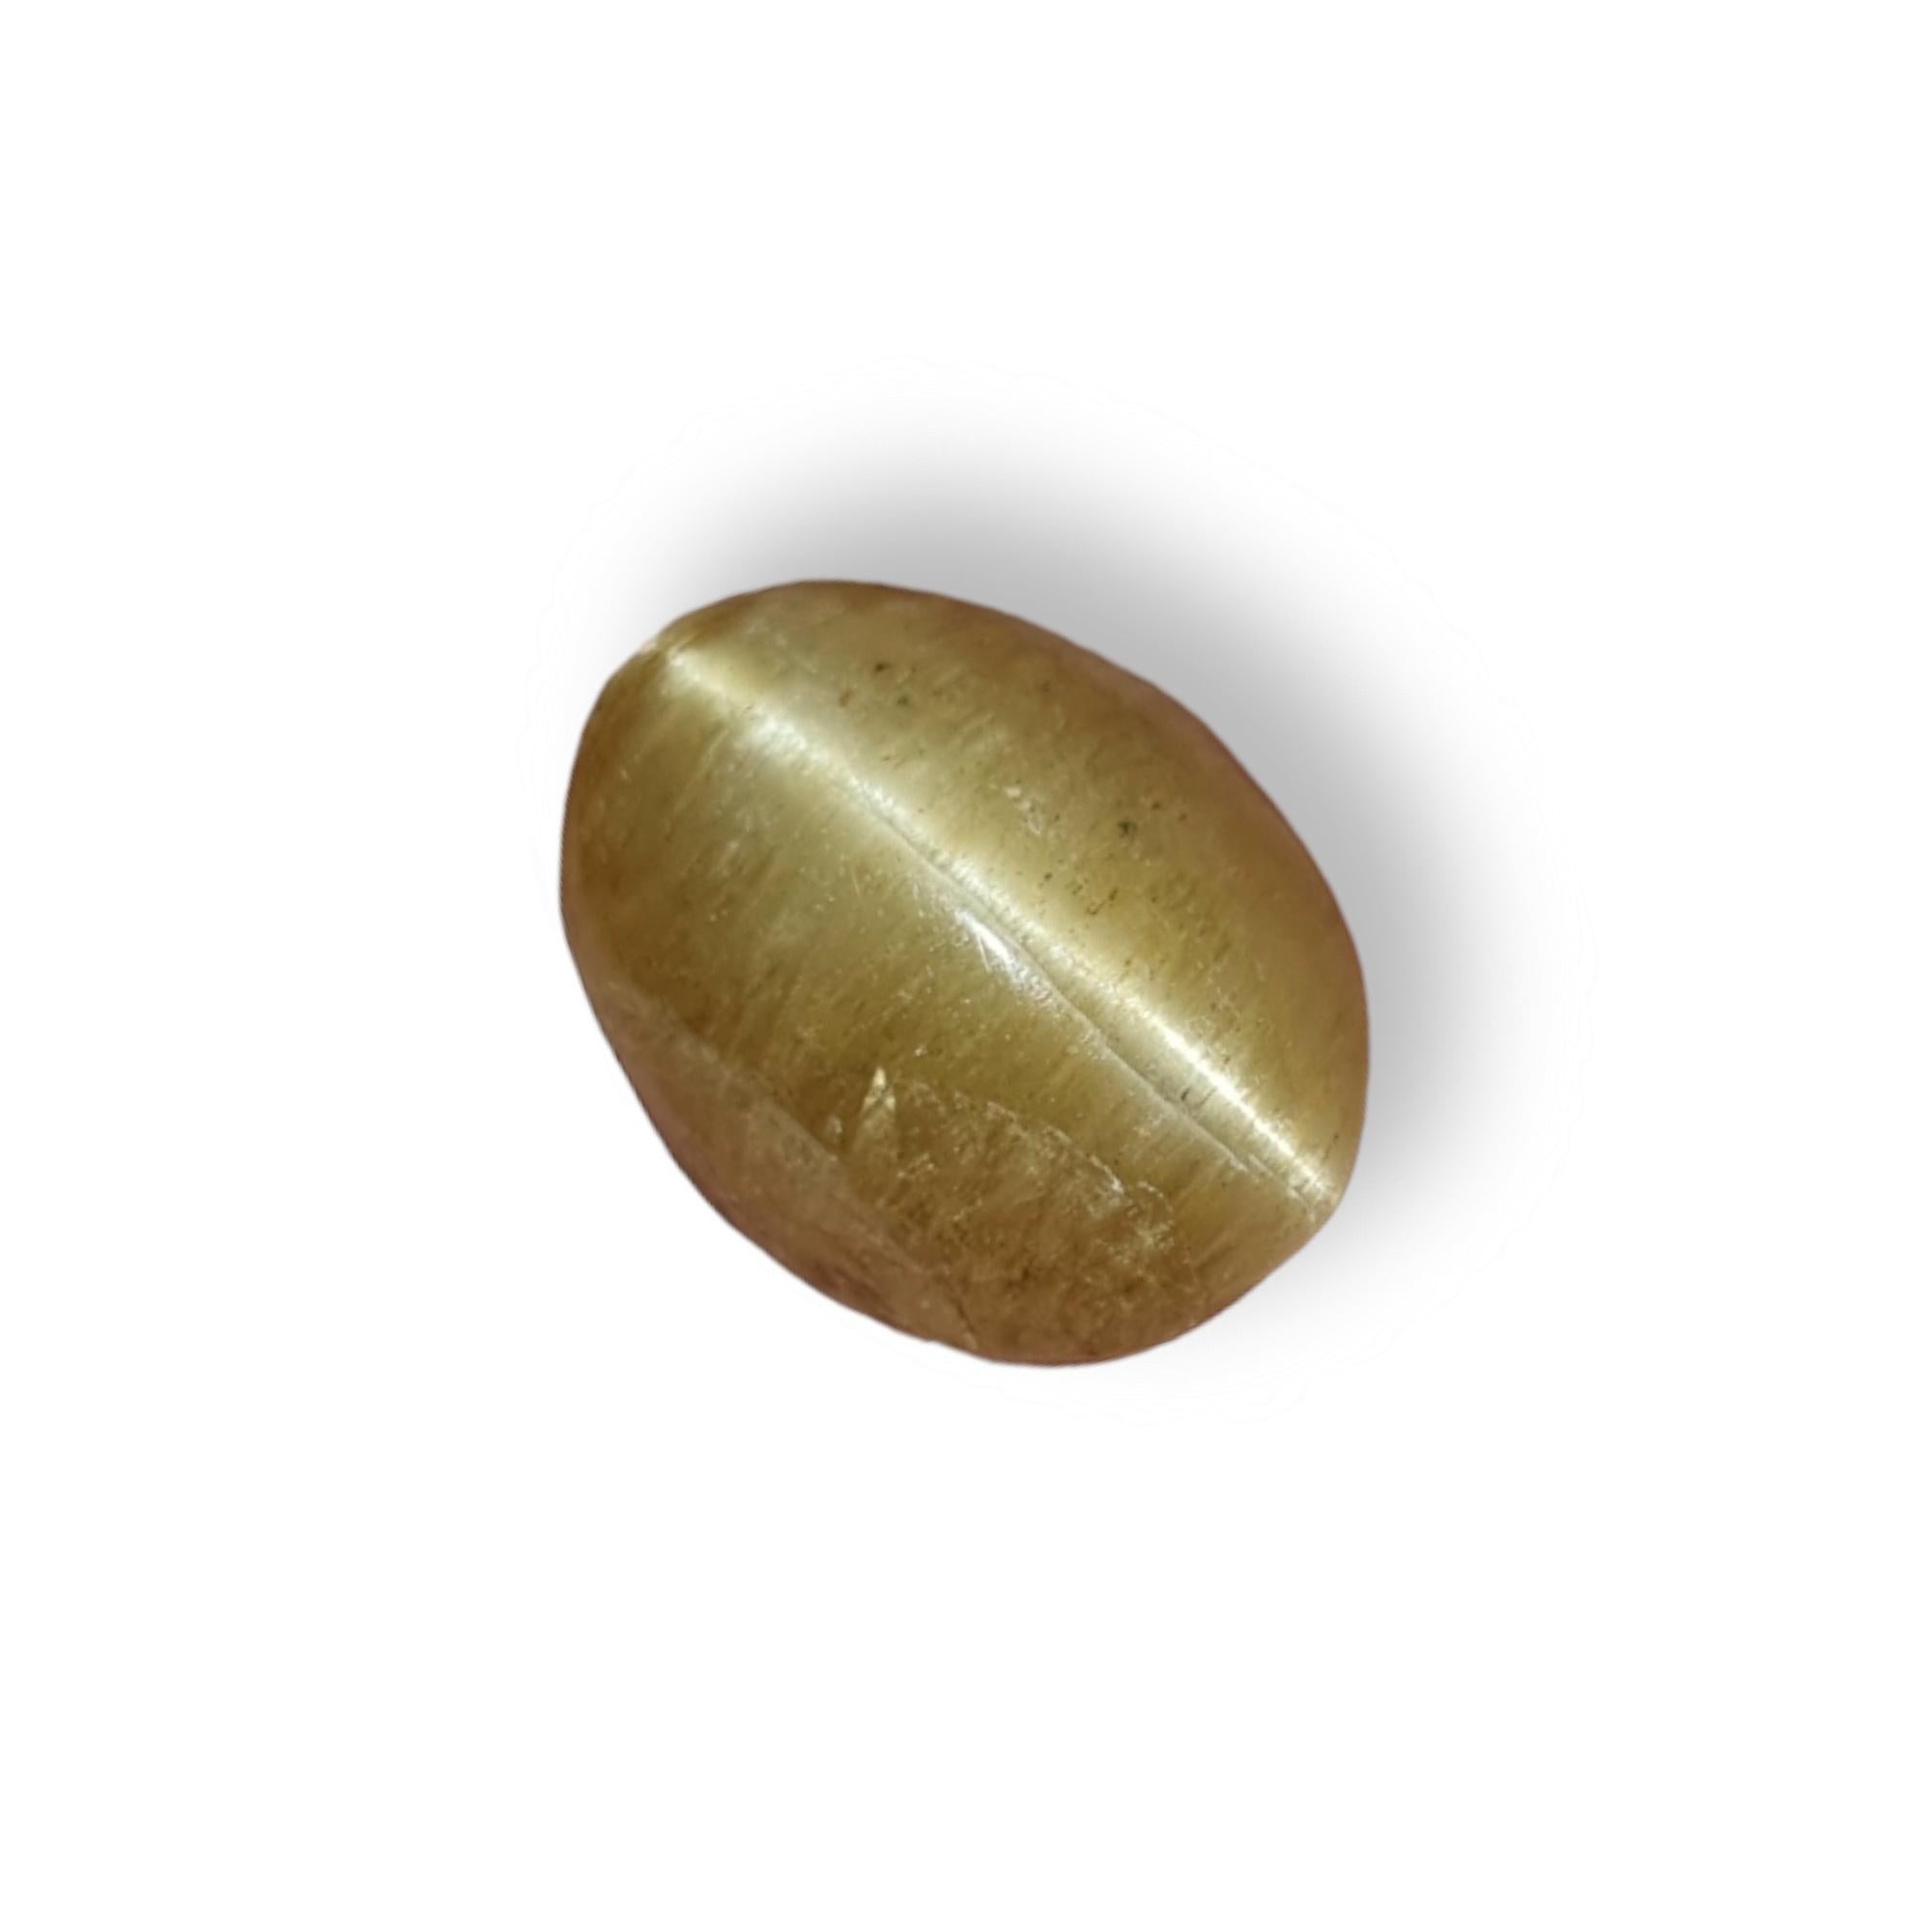 Gemstone - Cat's eye
Mineral class - Chrysoberyl
Transparency - Translucent
Color - Yellow
Shape - Oval
Carat - 15.10 Ct
Size - 15 mm × 11 mm × 8 mm